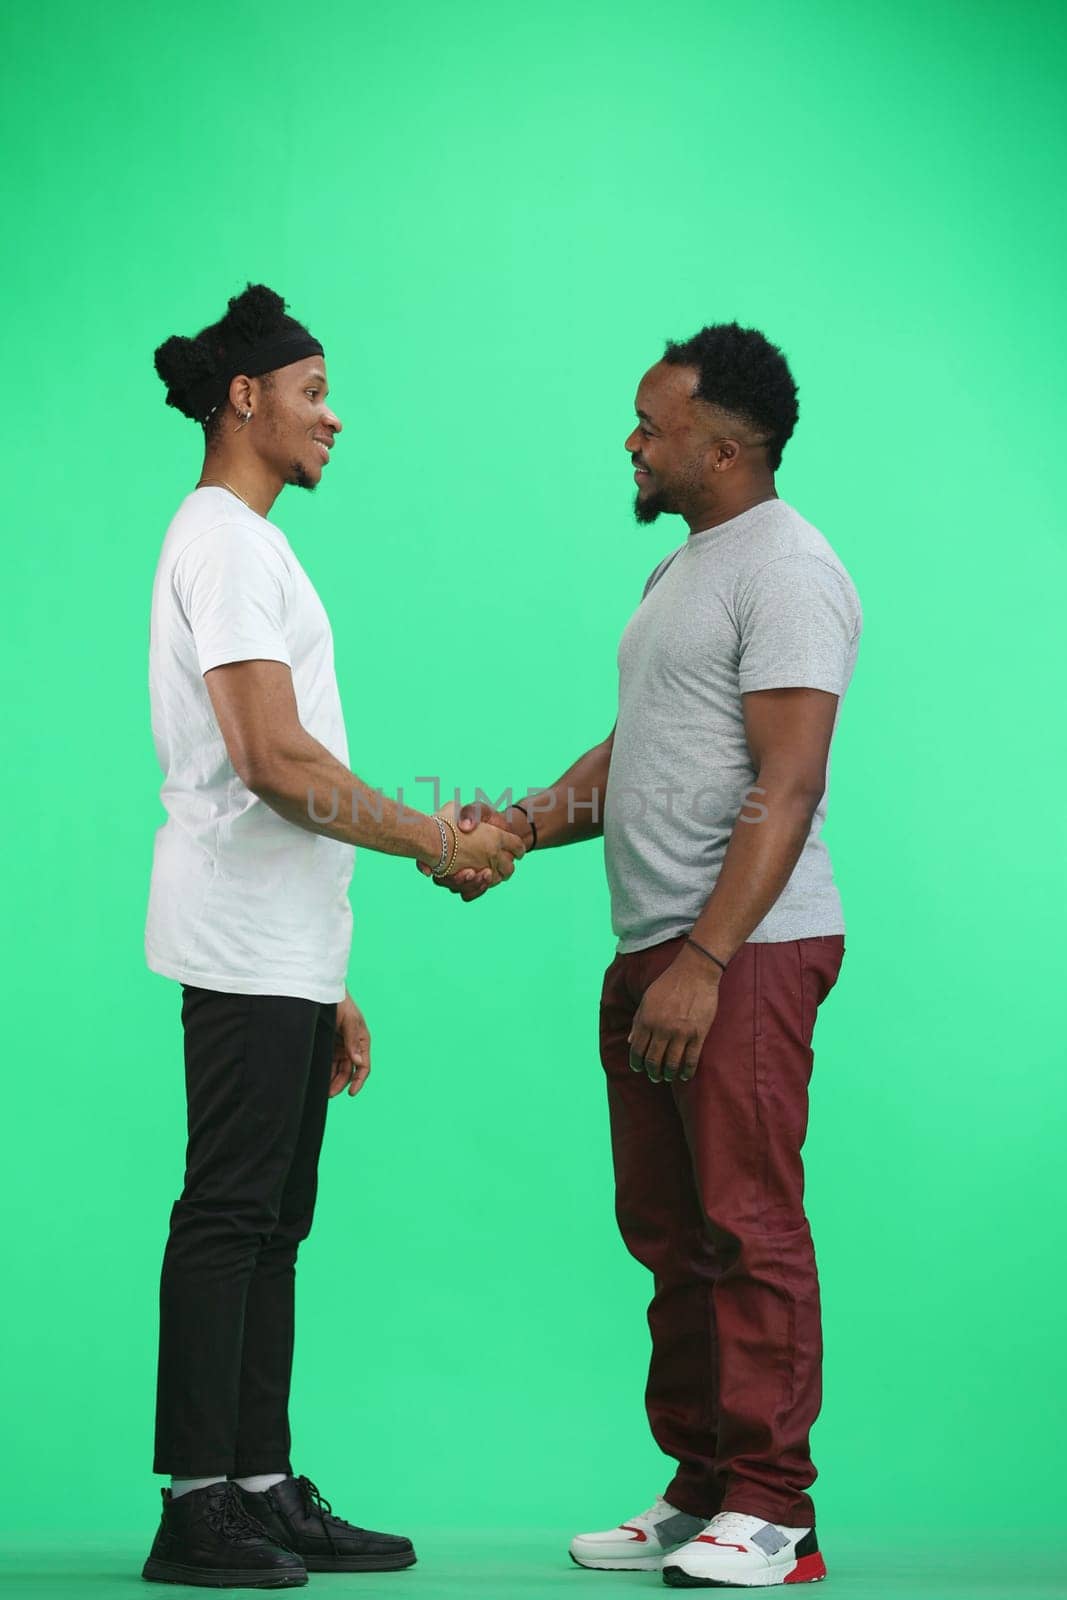 Men, full-length, on a green background, shaking hands by Prosto